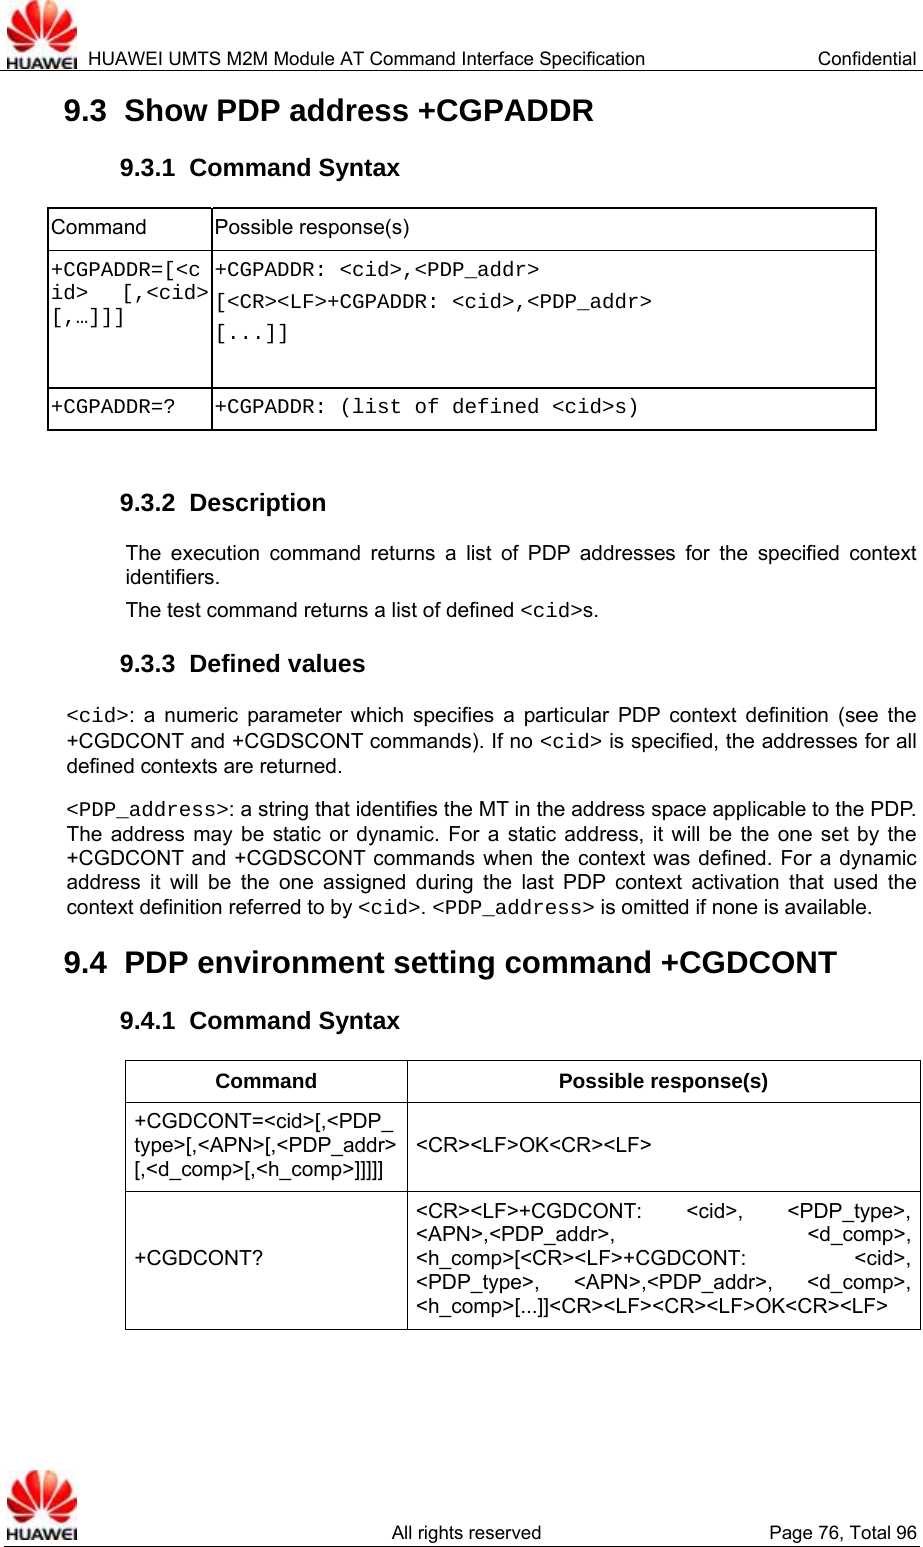  HUAWEI UMTS M2M Module AT Command Interface Specification  Confidential   All rights reserved  Page 76, Total 96 9.3  Show PDP address +CGPADDR 9.3.1  Command Syntax Command Possible response(s) +CGPADDR=[&lt;cid&gt; [,&lt;cid&gt; [,…]]] +CGPADDR: &lt;cid&gt;,&lt;PDP_addr&gt; [&lt;CR&gt;&lt;LF&gt;+CGPADDR: &lt;cid&gt;,&lt;PDP_addr&gt; [...]]  +CGPADDR=?  +CGPADDR: (list of defined &lt;cid&gt;s)  9.3.2  Description The execution command returns a list of PDP addresses for the specified context identifiers. The test command returns a list of defined &lt;cid&gt;s. 9.3.3  Defined values  &lt;cid&gt;: a numeric parameter which specifies a particular PDP context definition (see the +CGDCONT and +CGDSCONT commands). If no &lt;cid&gt; is specified, the addresses for all defined contexts are returned.  &lt;PDP_address&gt;: a string that identifies the MT in the address space applicable to the PDP. The address may be static or dynamic. For a static address, it will be the one set by the +CGDCONT and +CGDSCONT commands when the context was defined. For a dynamic address it will be the one assigned during the last PDP context activation that used the context definition referred to by &lt;cid&gt;. &lt;PDP_address&gt; is omitted if none is available. 9.4  PDP environment setting command +CGDCONT 9.4.1  Command Syntax Command Possible response(s) +CGDCONT=&lt;cid&gt;[,&lt;PDP_type&gt;[,&lt;APN&gt;[,&lt;PDP_addr&gt;[,&lt;d_comp&gt;[,&lt;h_comp&gt;]]]]] &lt;CR&gt;&lt;LF&gt;OK&lt;CR&gt;&lt;LF&gt; +CGDCONT? &lt;CR&gt;&lt;LF&gt;+CGDCONT: &lt;cid&gt;, &lt;PDP_type&gt;, &lt;APN&gt;,&lt;PDP_addr&gt;, &lt;d_comp&gt;, &lt;h_comp&gt;[&lt;CR&gt;&lt;LF&gt;+CGDCONT: &lt;cid&gt;, &lt;PDP_type&gt;, &lt;APN&gt;,&lt;PDP_addr&gt;, &lt;d_comp&gt;, &lt;h_comp&gt;[...]]&lt;CR&gt;&lt;LF&gt;&lt;CR&gt;&lt;LF&gt;OK&lt;CR&gt;&lt;LF&gt; 